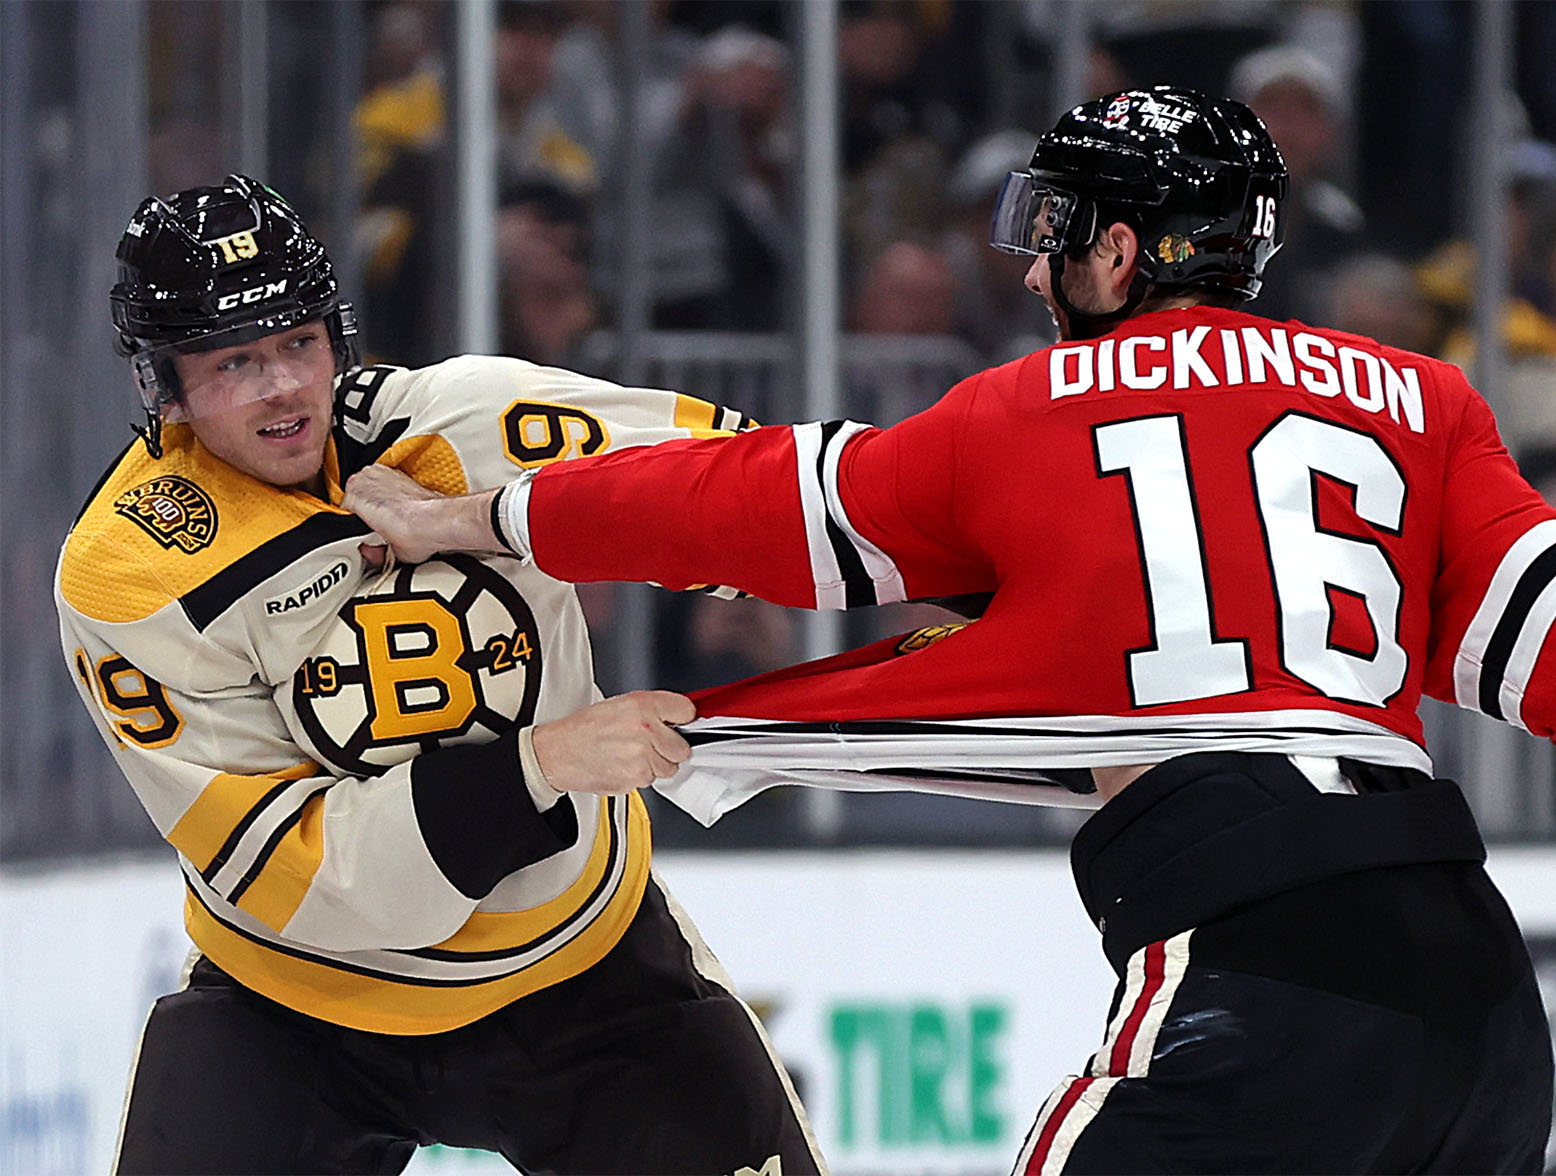 BOSTON, MASSACHUSETTS - OCTOBER 11: Johnny Beecher #19 of the Boston Bruins fights with Jason Dickinson #16 of the Chicago Blackhawks during the third period of the Bruins home opener at TD Garden on October 11, 2023 in Boston, Massachusetts. The Bruins defeat the Blackhawks 3-1. (Photo by Maddie Meyer/Getty Images)